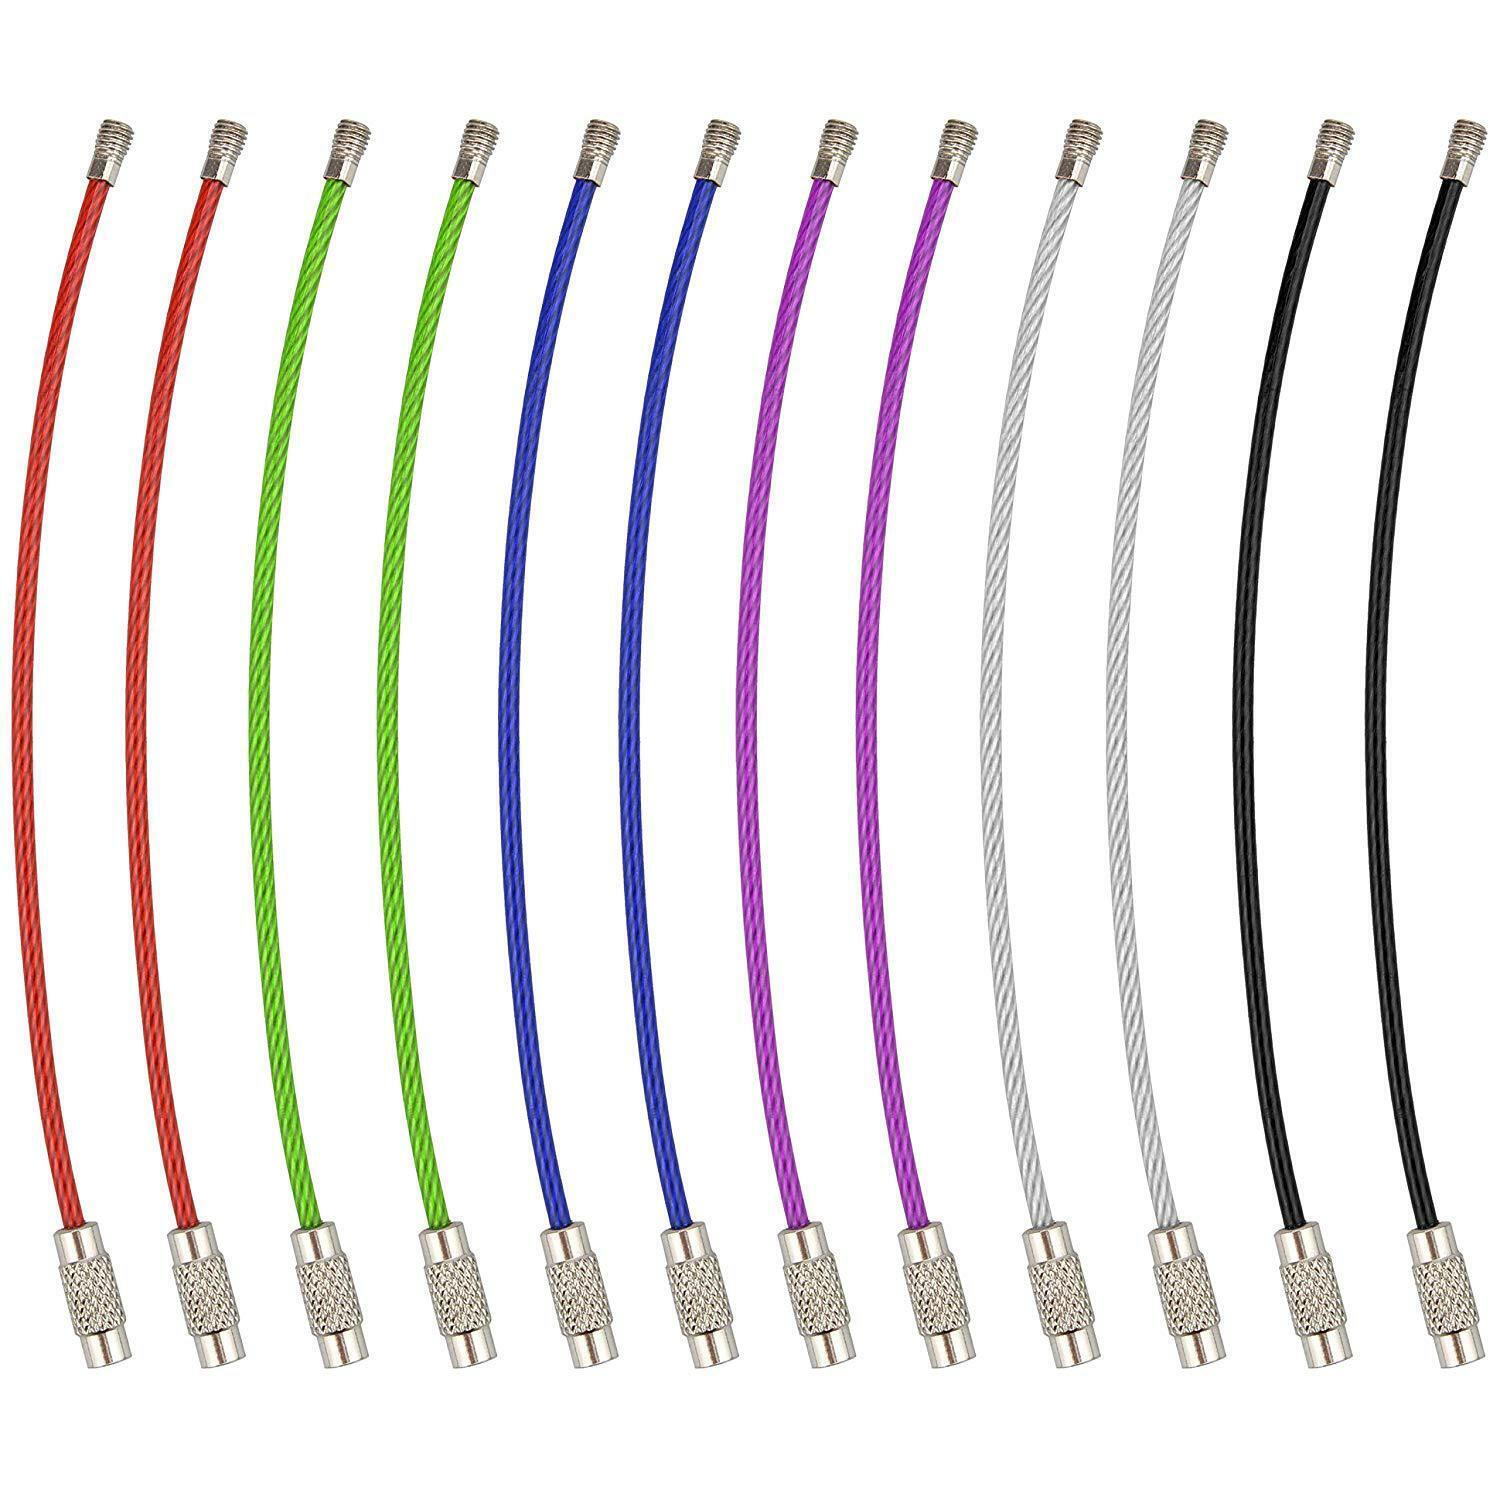 10pc Colorful Stainles Steel Wire Cable Keychain Key Ring Chain With Screw Lock